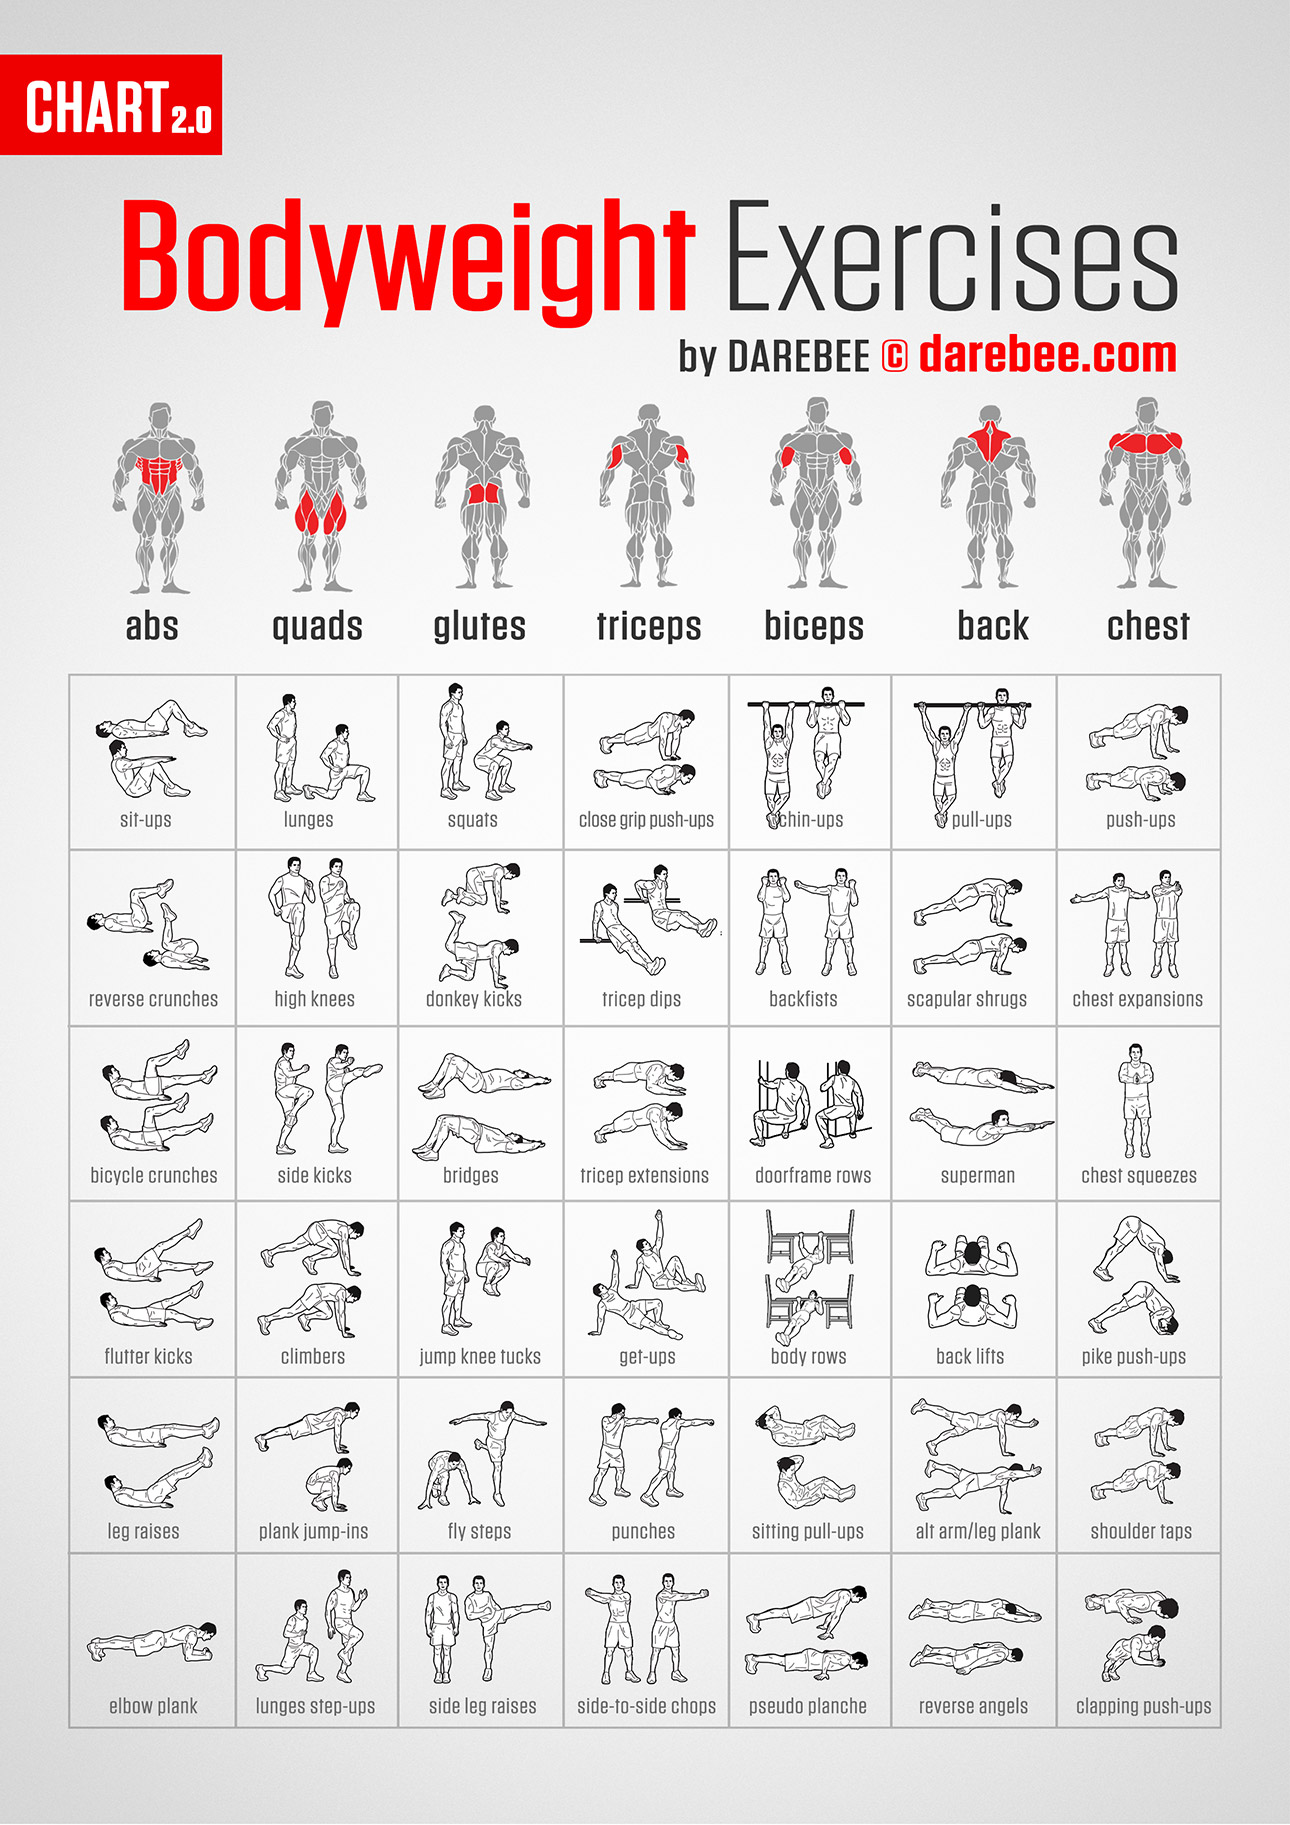 work-out-every-muscle-with-this-bodyweight-exercise-chart